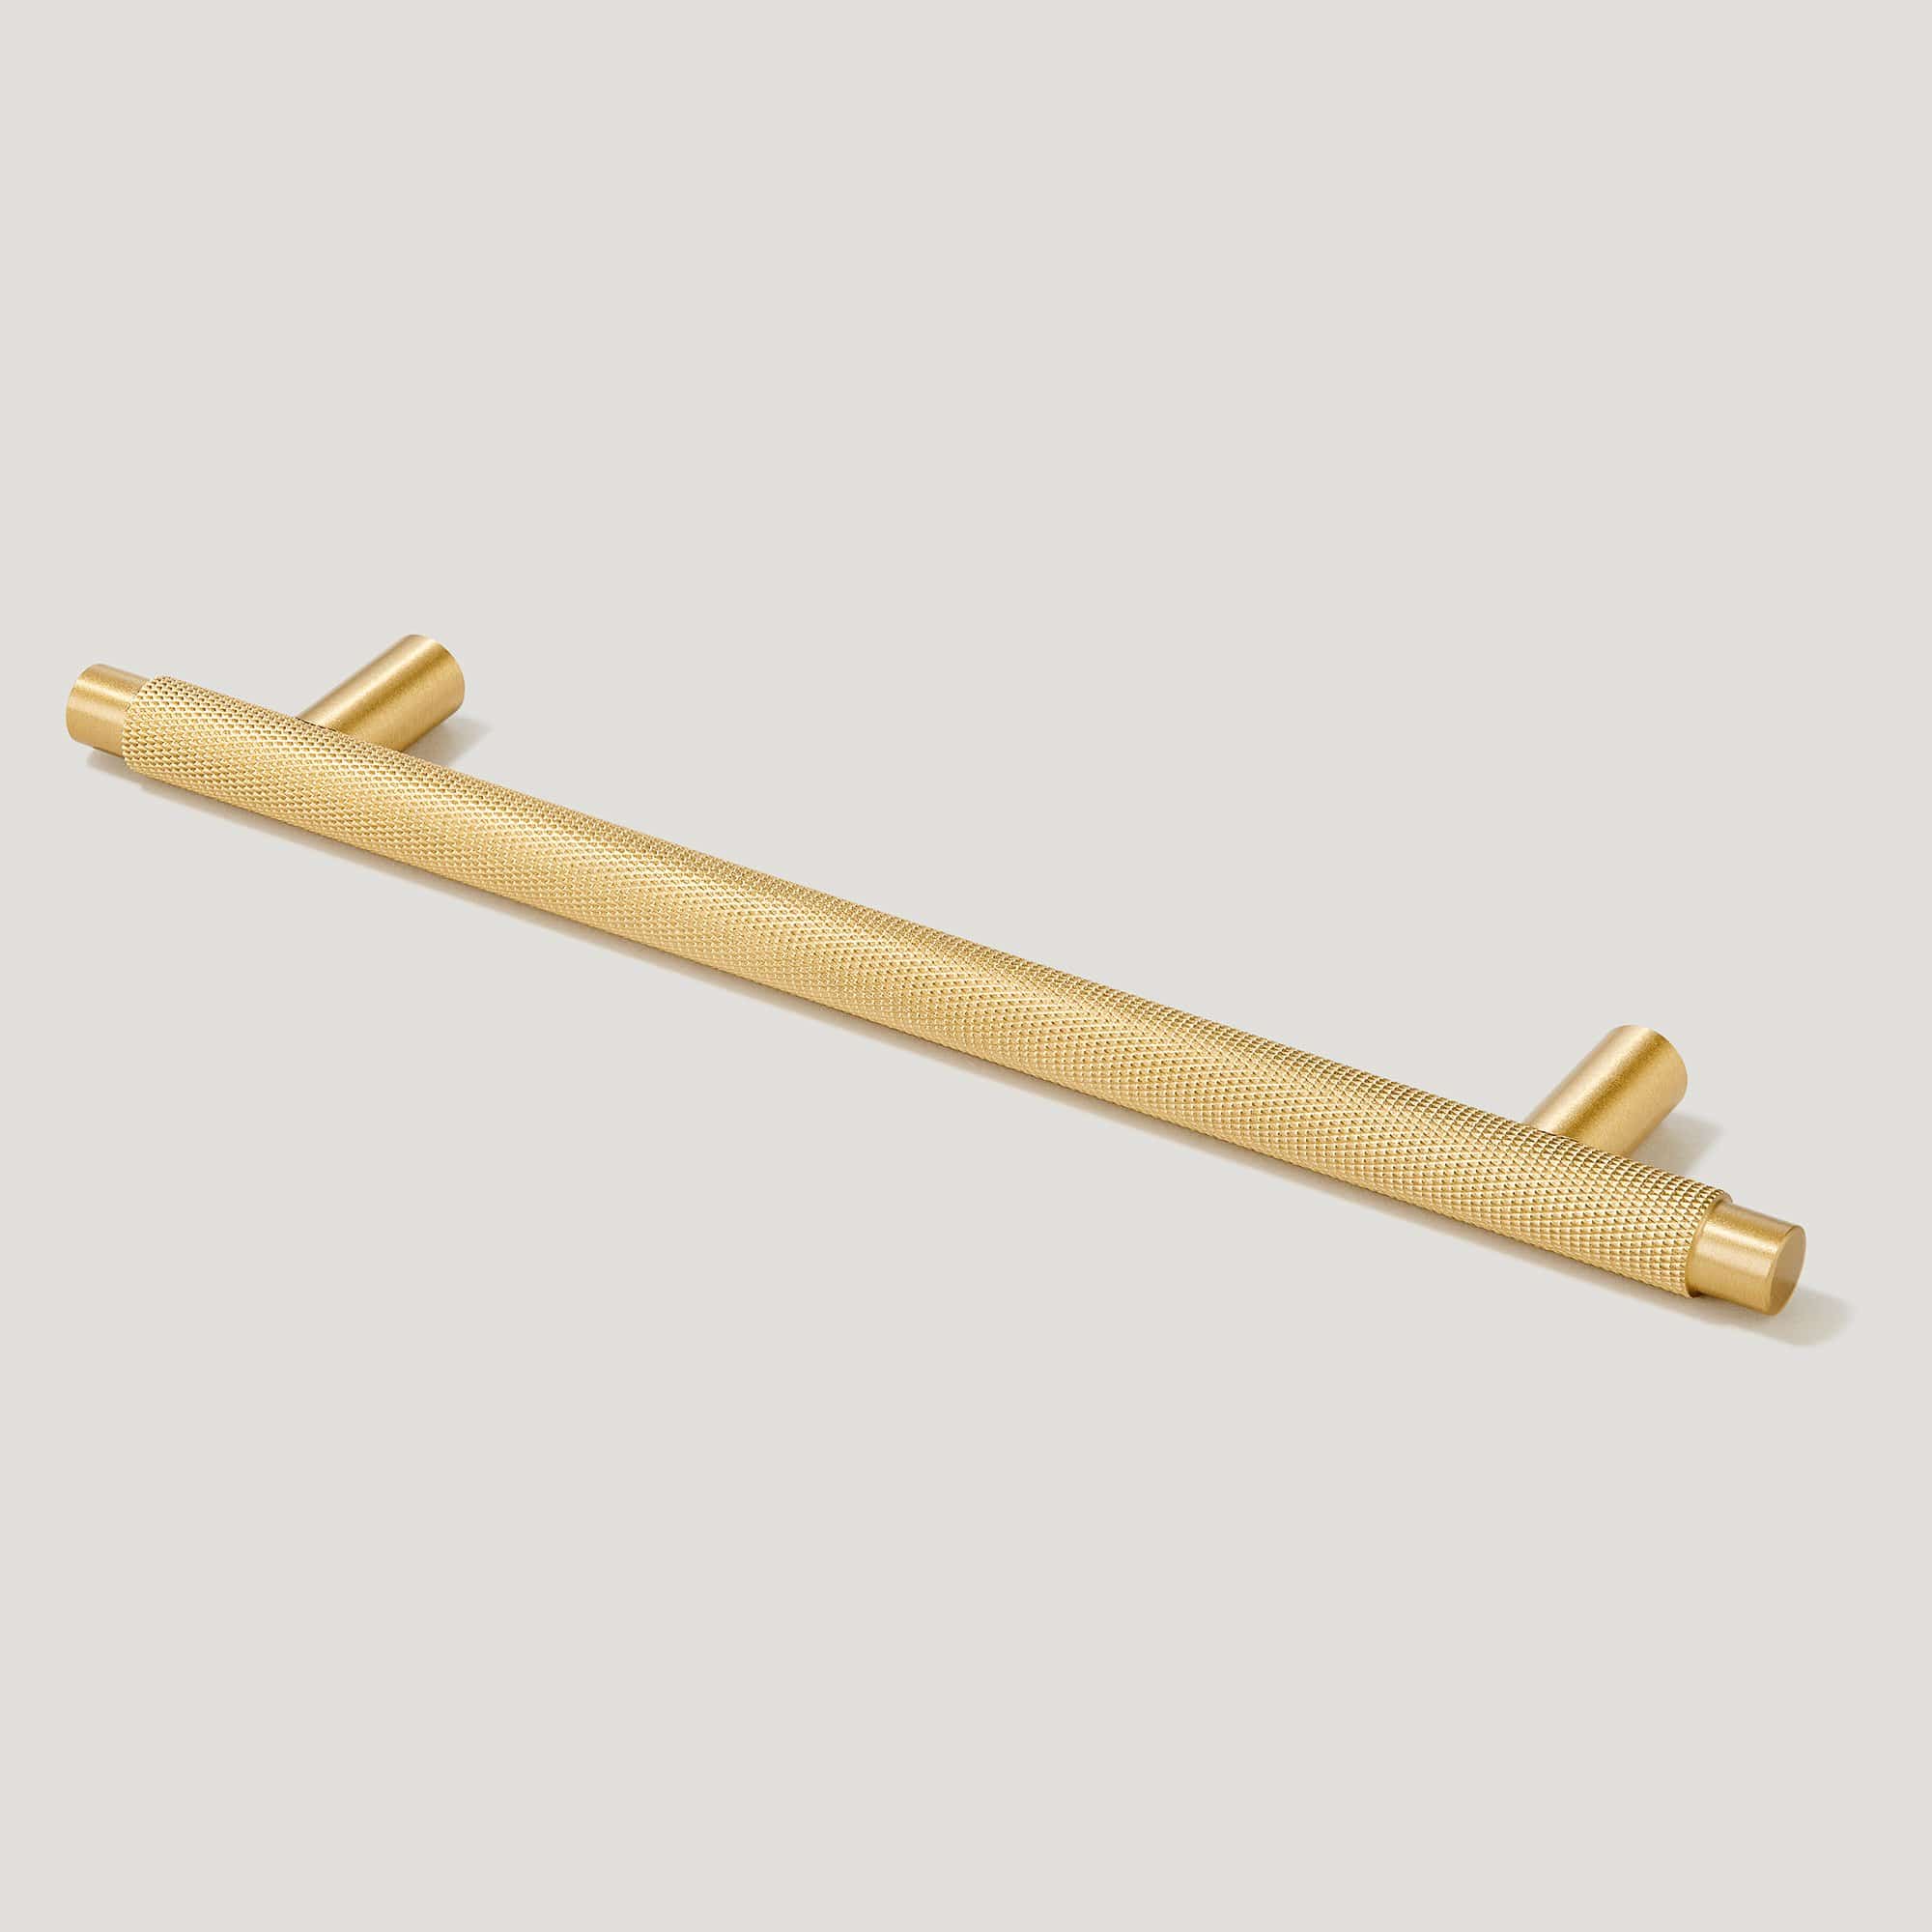 Plank Hardware 8.66'' (6.30'' CC) / Handle Only KEPLER Knurled T-Bar Pull - Brass